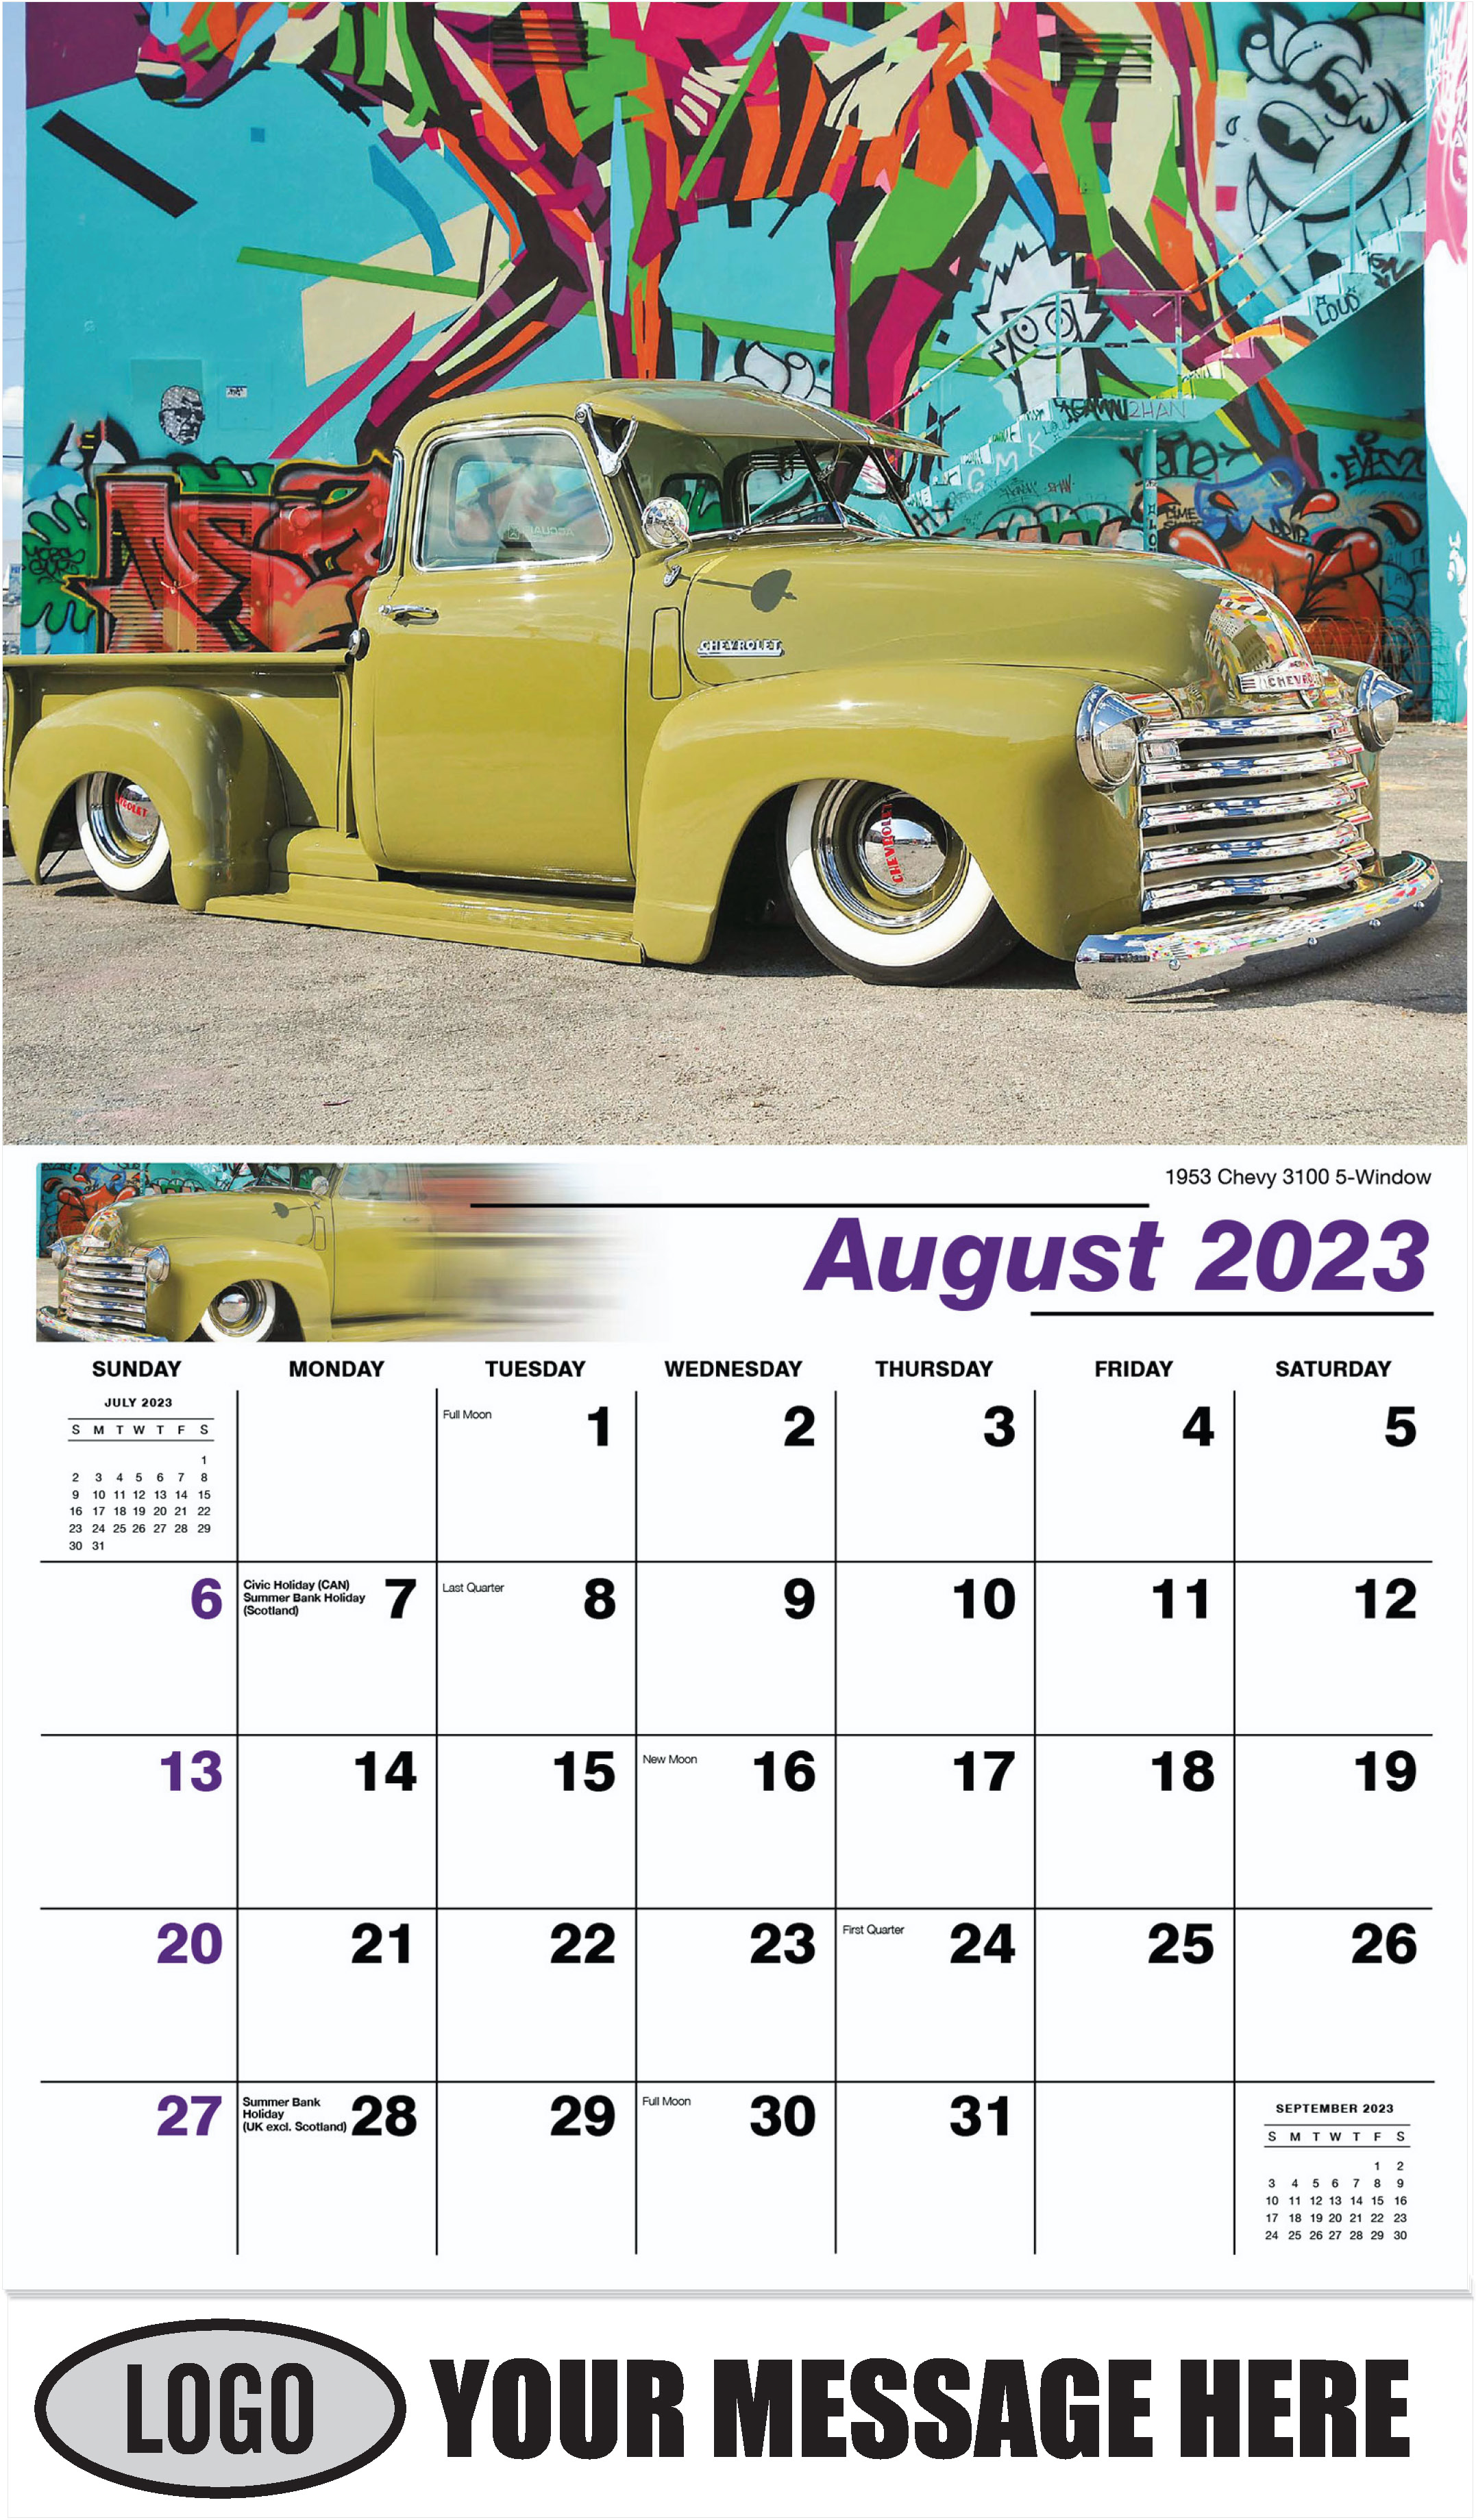 1953 Chevy 3100 5-Window - August - Pumped Up Pickups 2023 Promotional Calendar